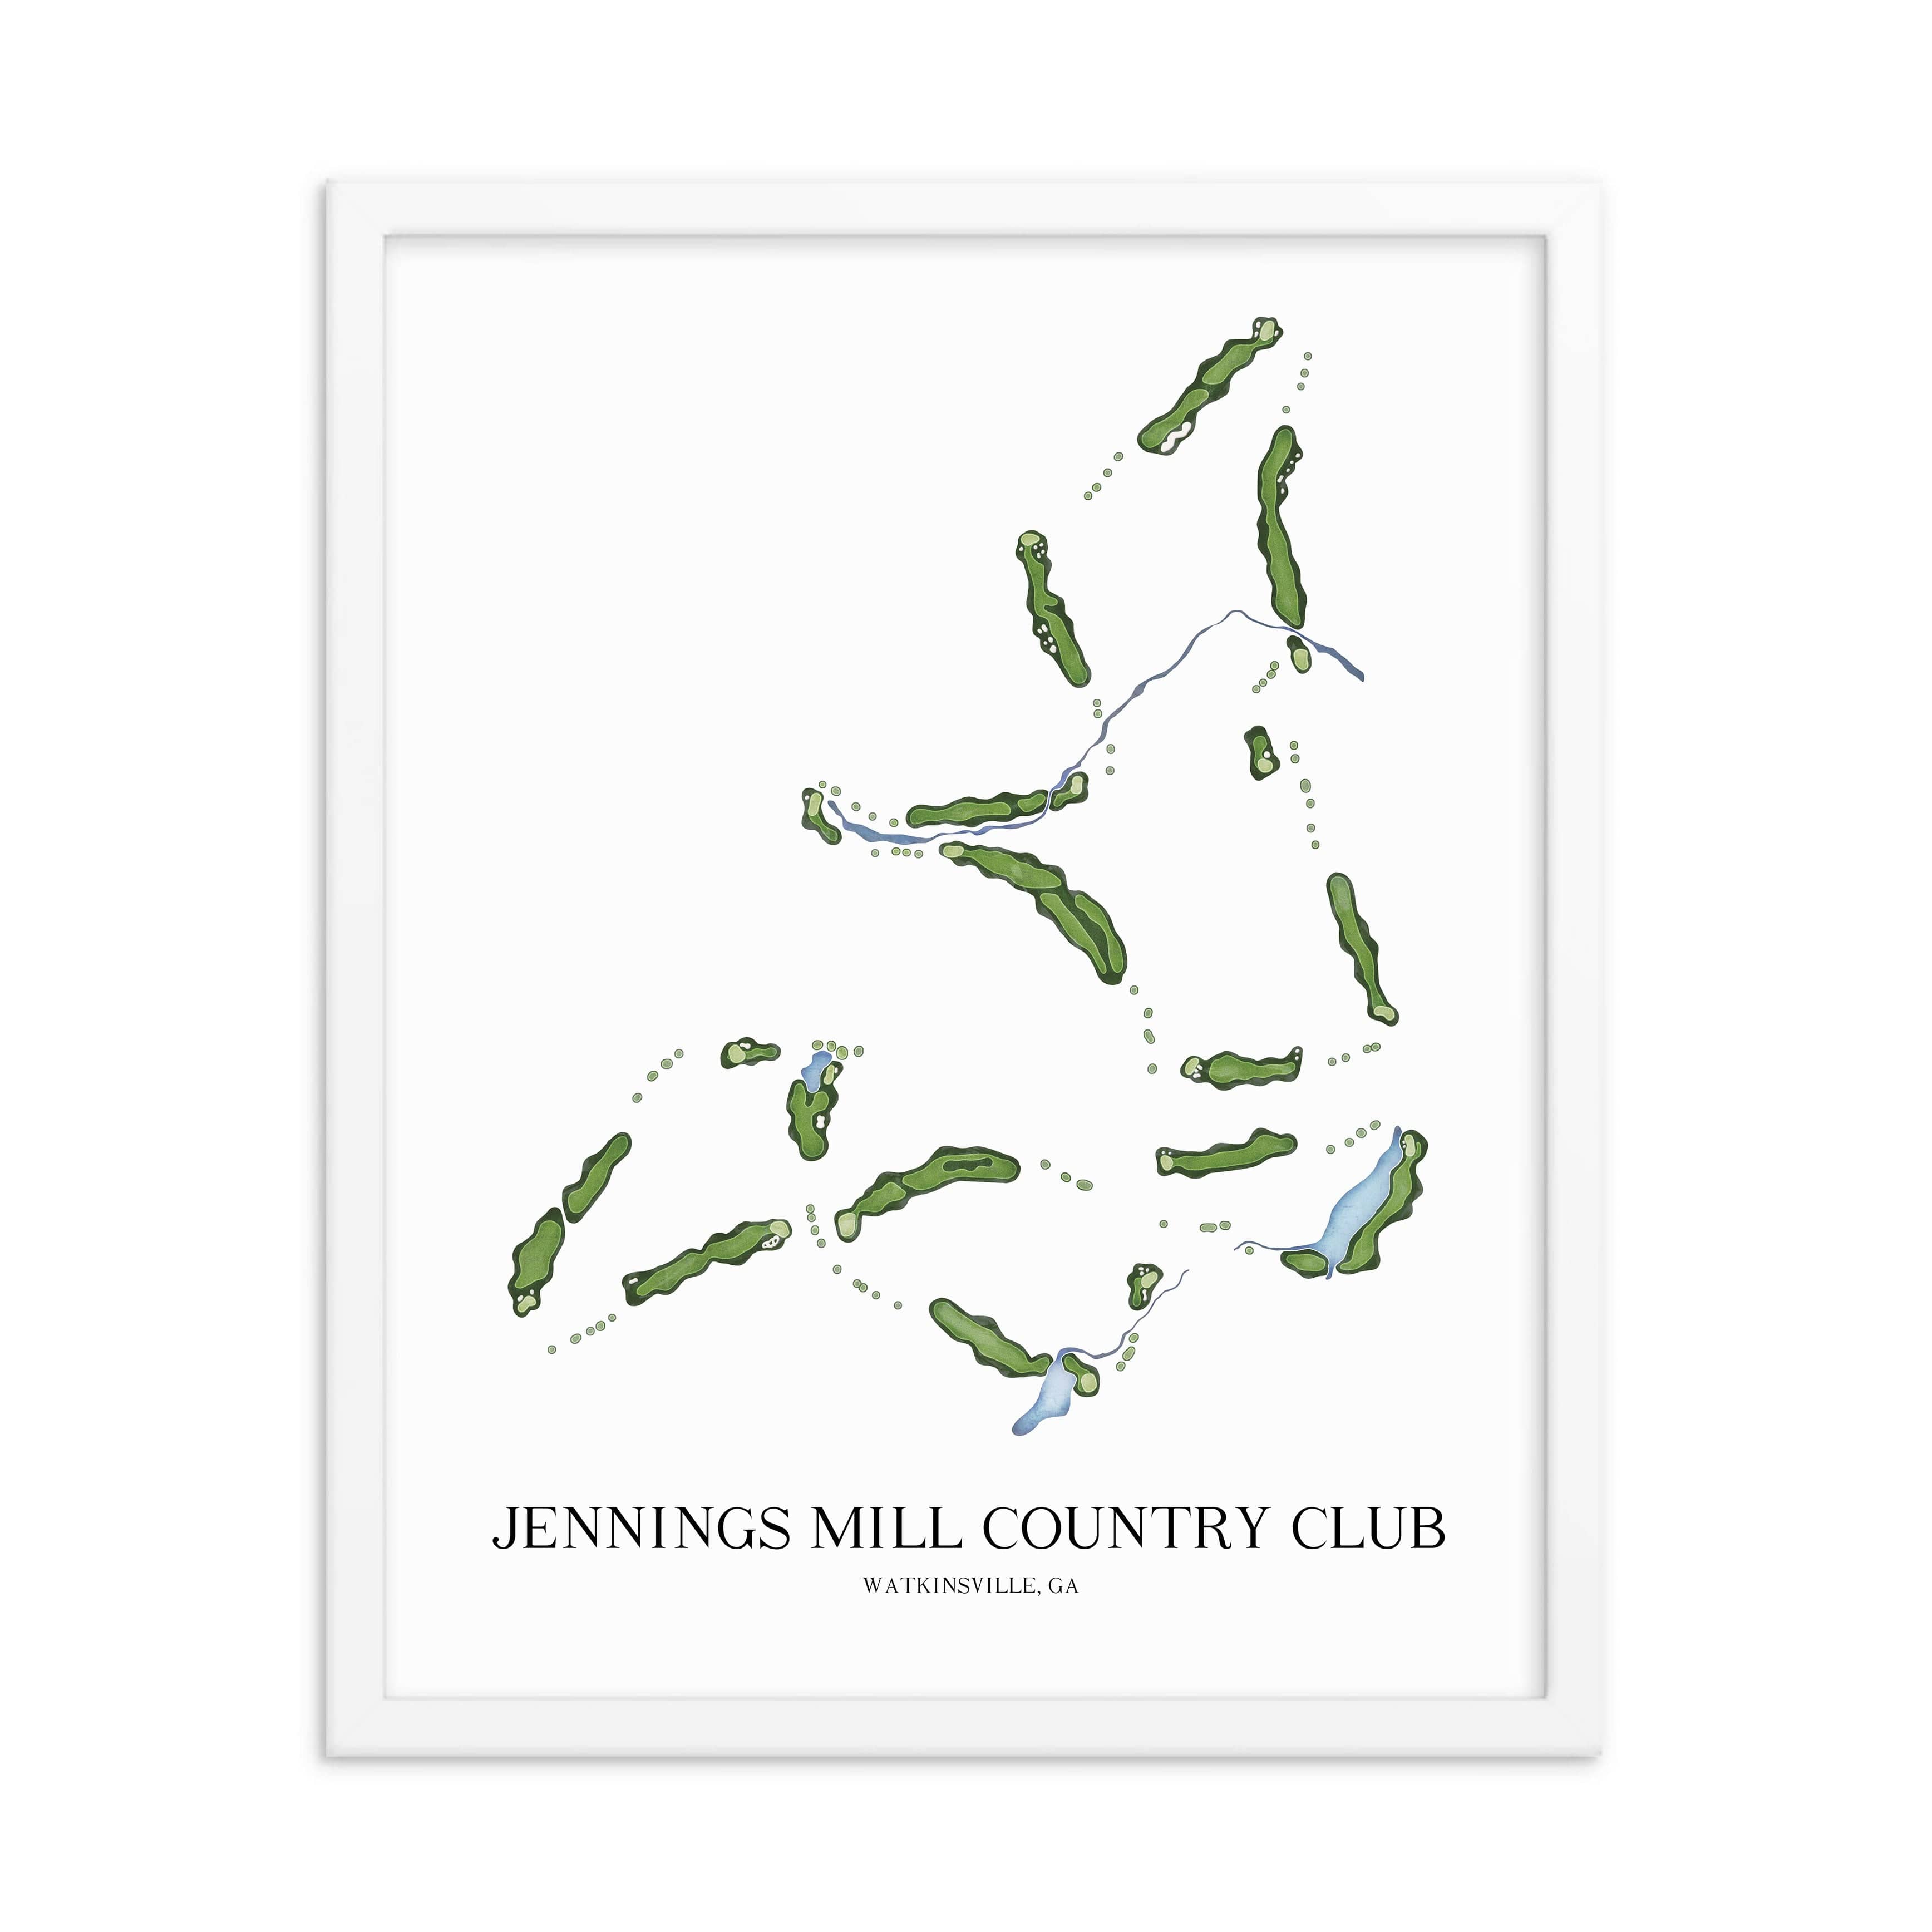 The 19th Hole Golf Shop - Golf Course Prints -  Jennings Mill Country Club Golf Course Map